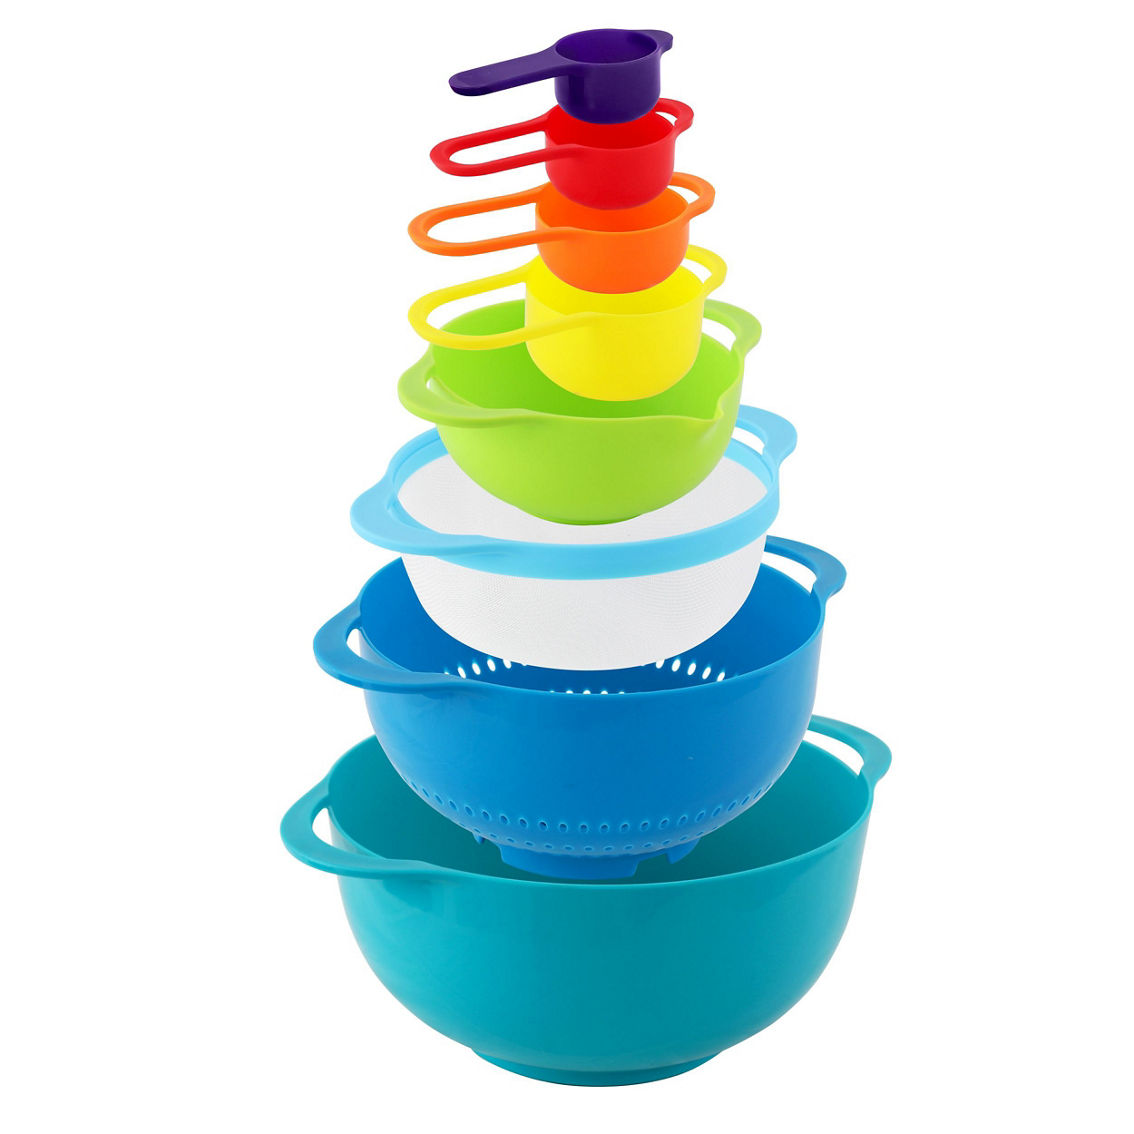 MegaChef Multipurpose Stackable Mixing Bowl and Measuring Cup Set - Image 4 of 5